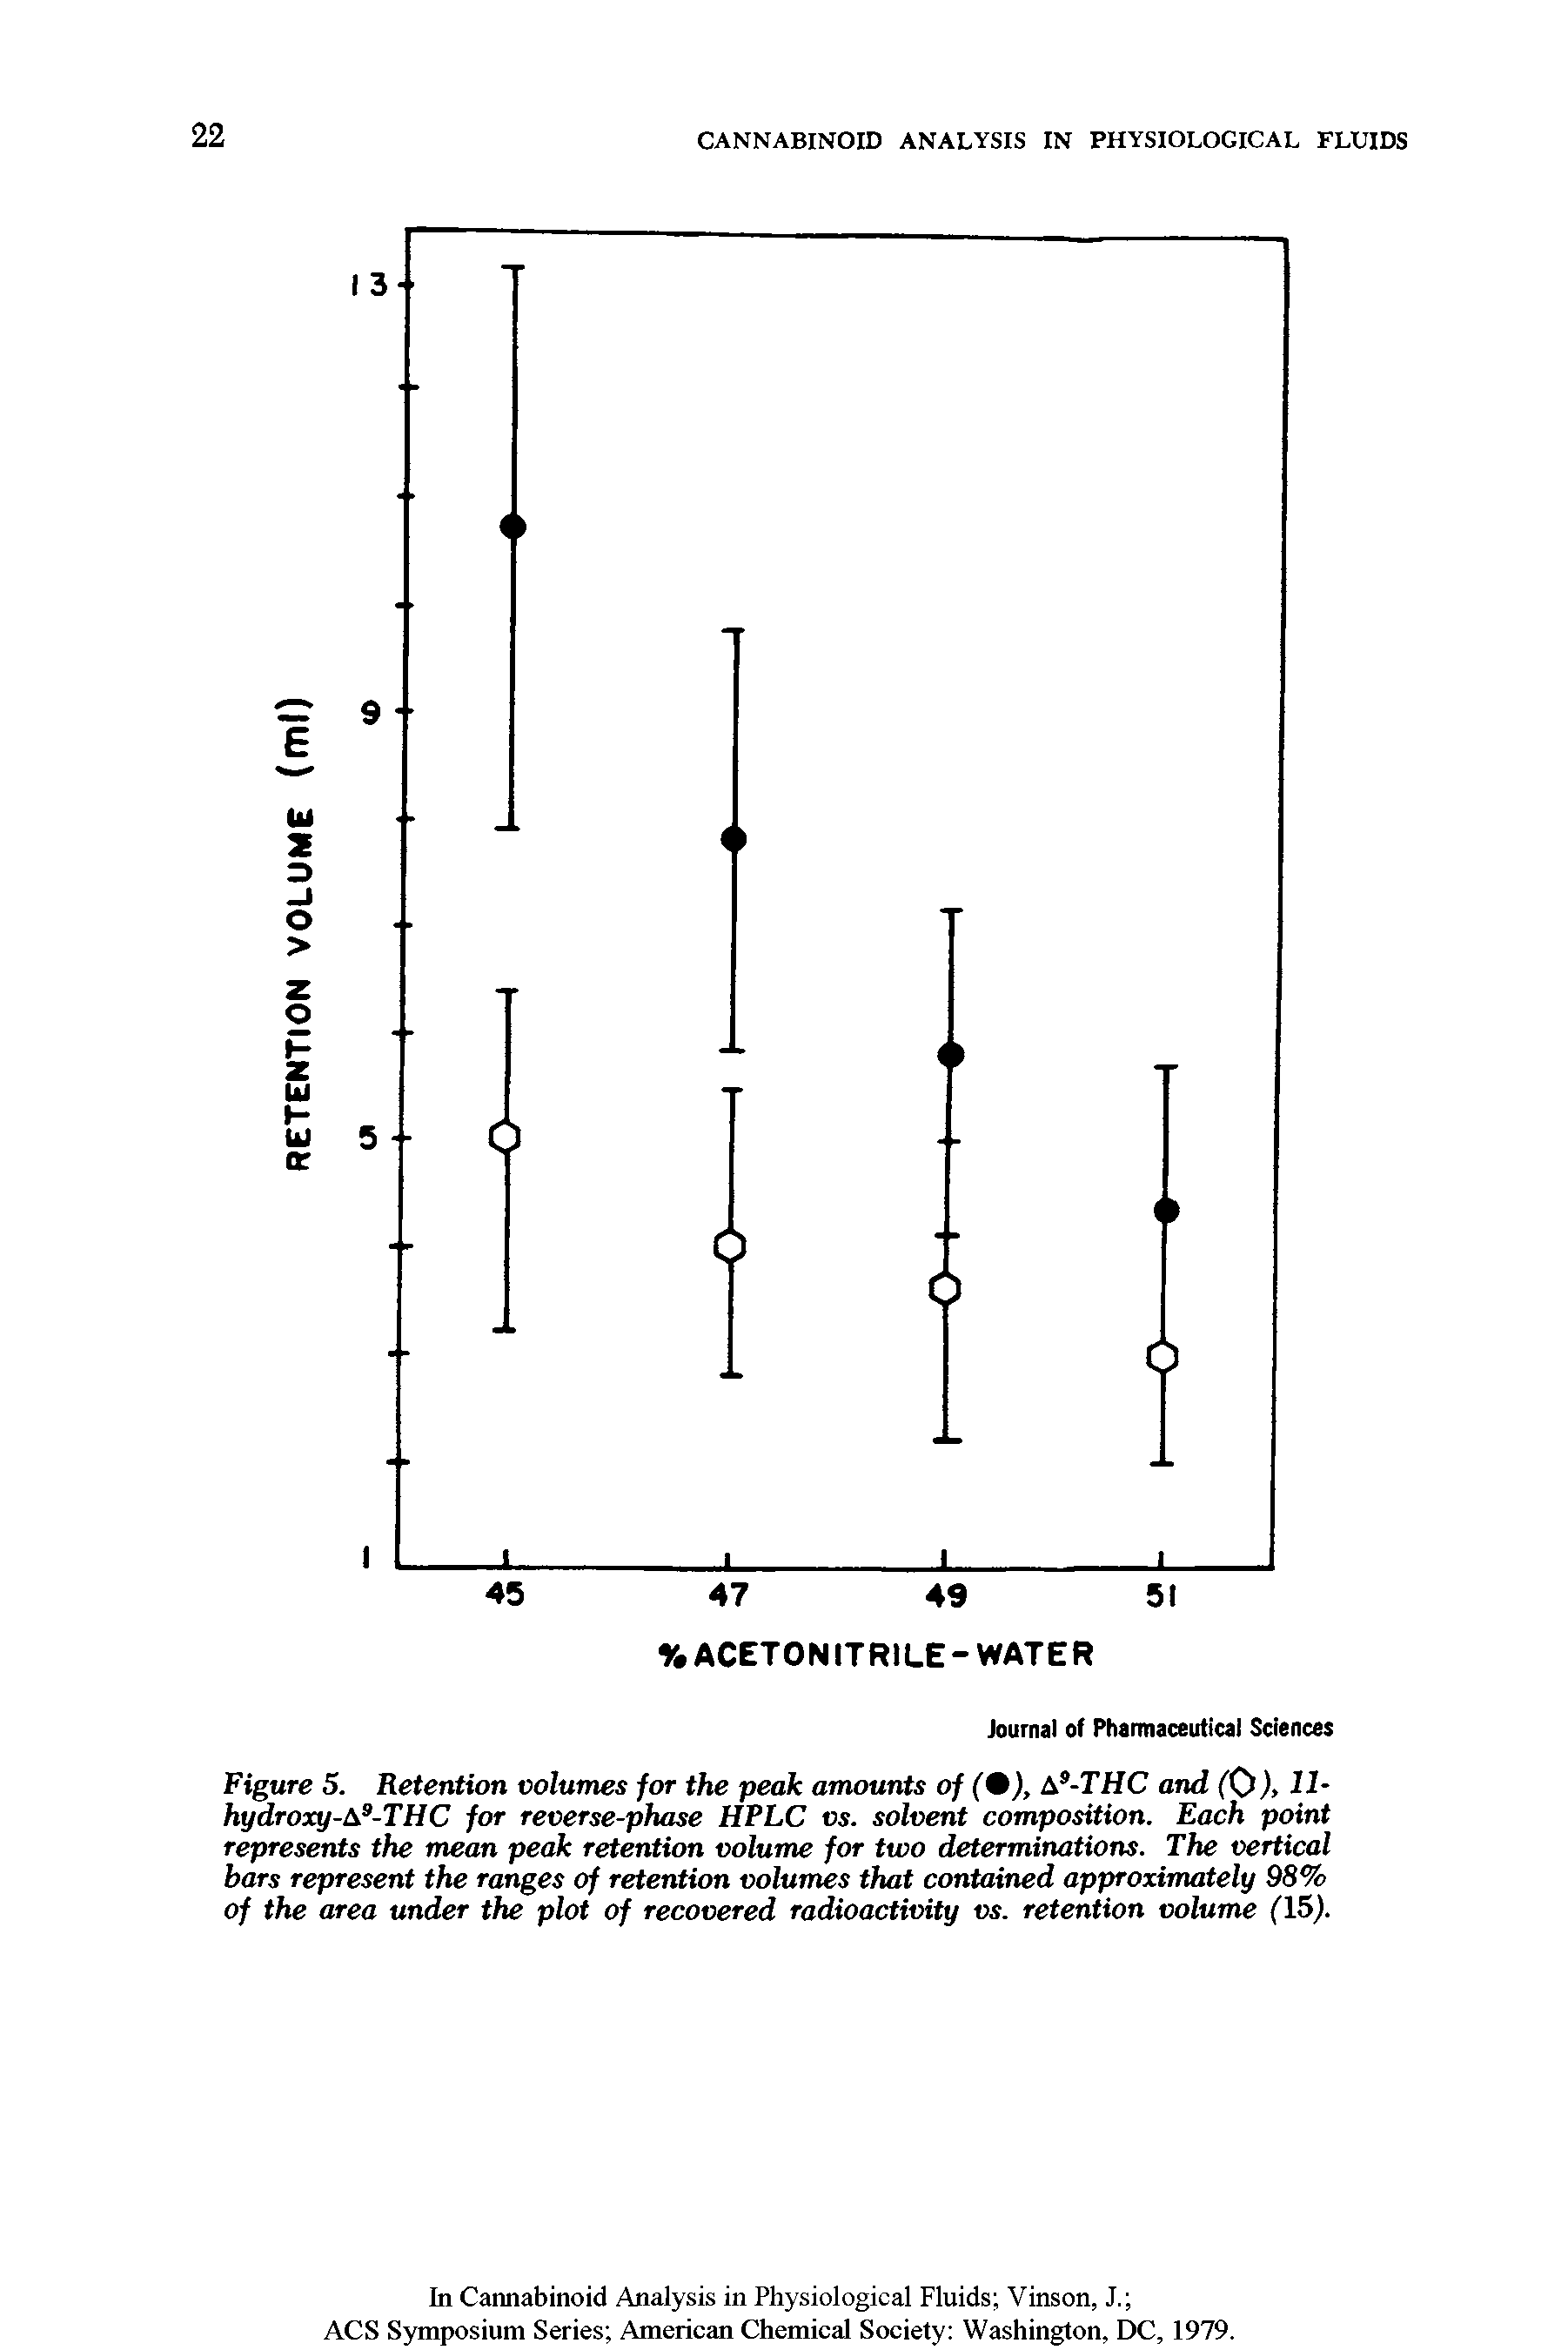 Figure 5. Retention volumes for the peak amounts of ( ), A9-THC and (0), II-hydroxy-A9-THC for reverse-phase HPLC vs. solvent composition. Each point represents the mean peak retention volume for two determinations. The vertical bars represent the ranges of retention volumes that contained approximately 98% of the area under the plot of recovered radioactivity vs. retention volume (15).